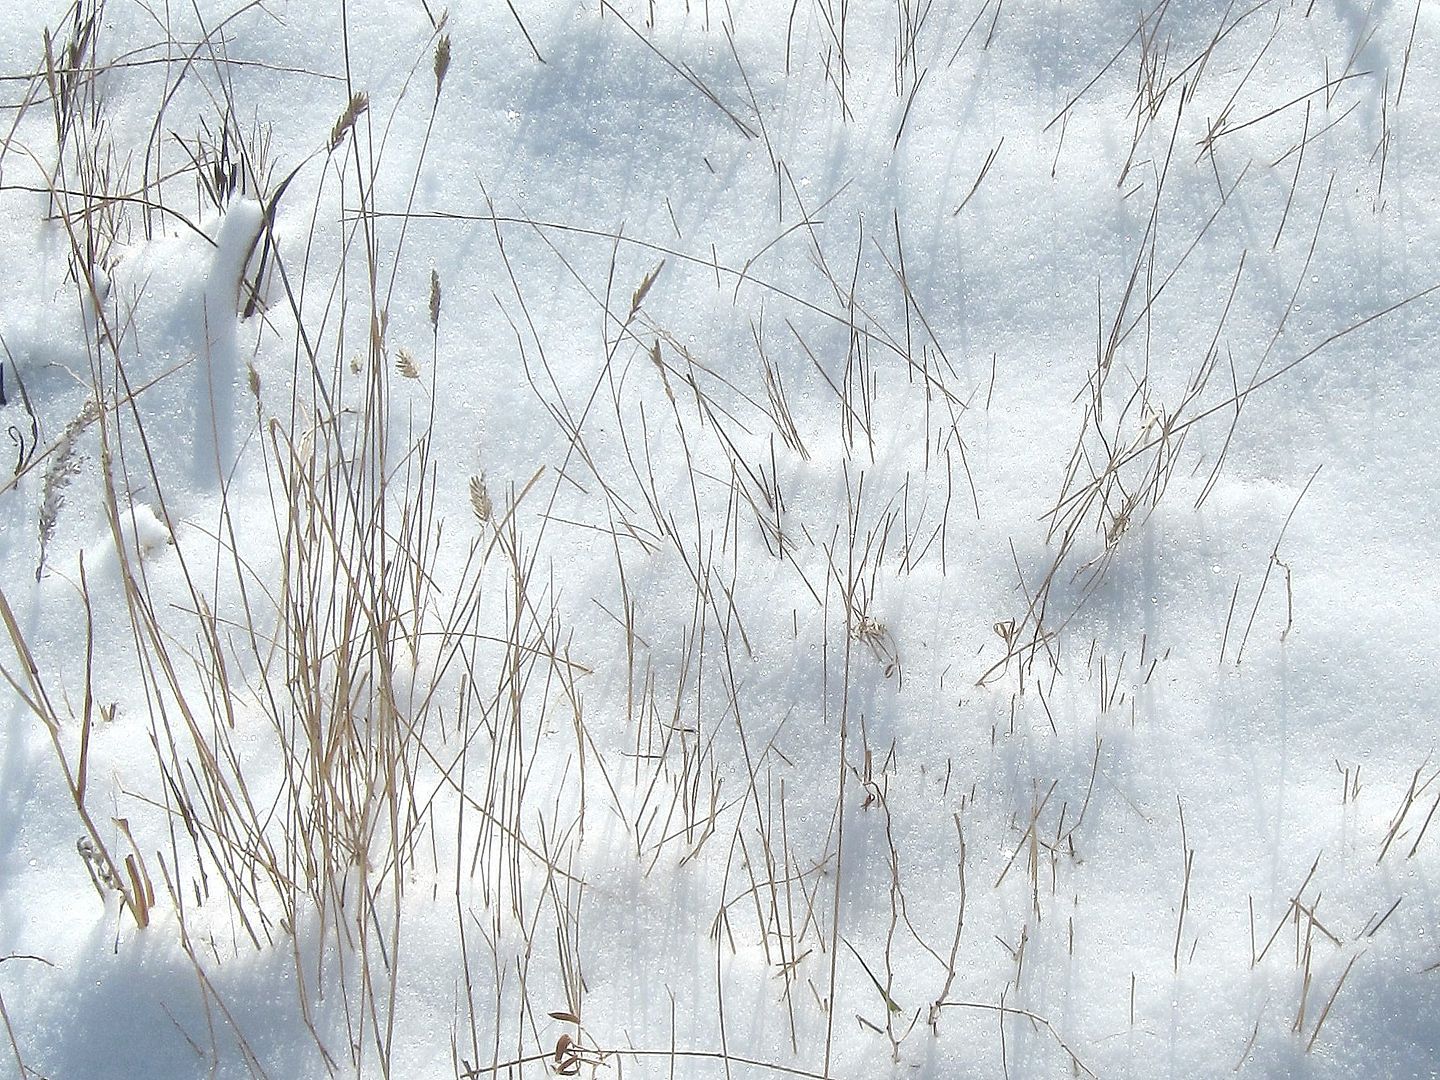  photo Grass in the Snow_zps1qegyxst.jpg